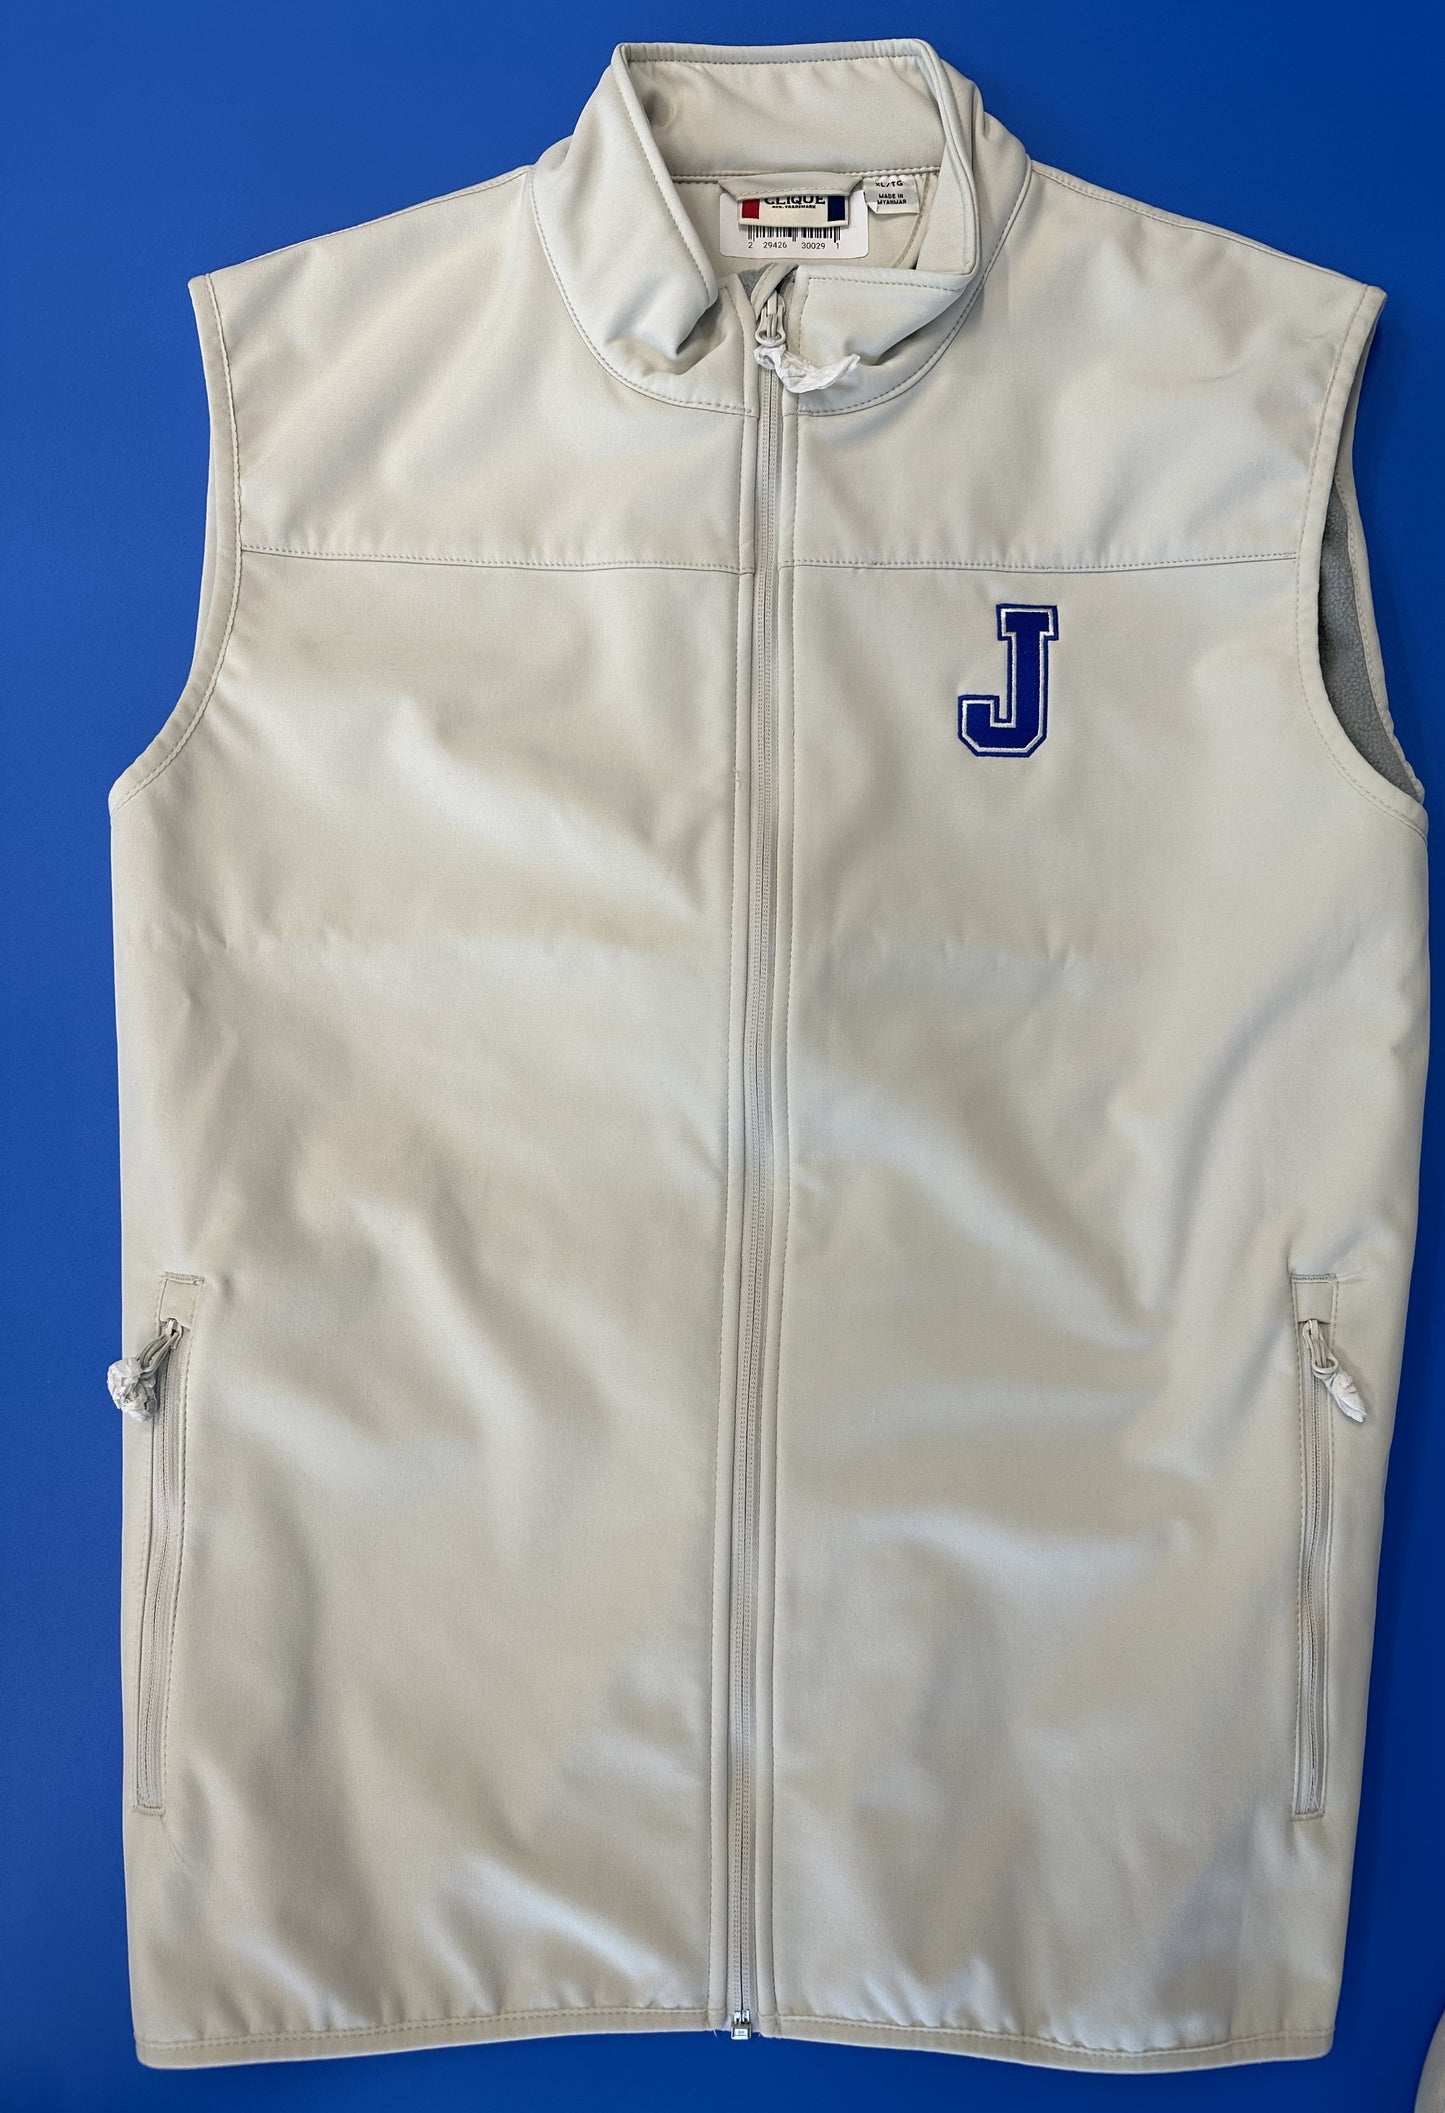 Clique  Outer:  96% Polyester/4% Spandex  Fleece Lining:  100% Polyester.  Embroidered J logo.